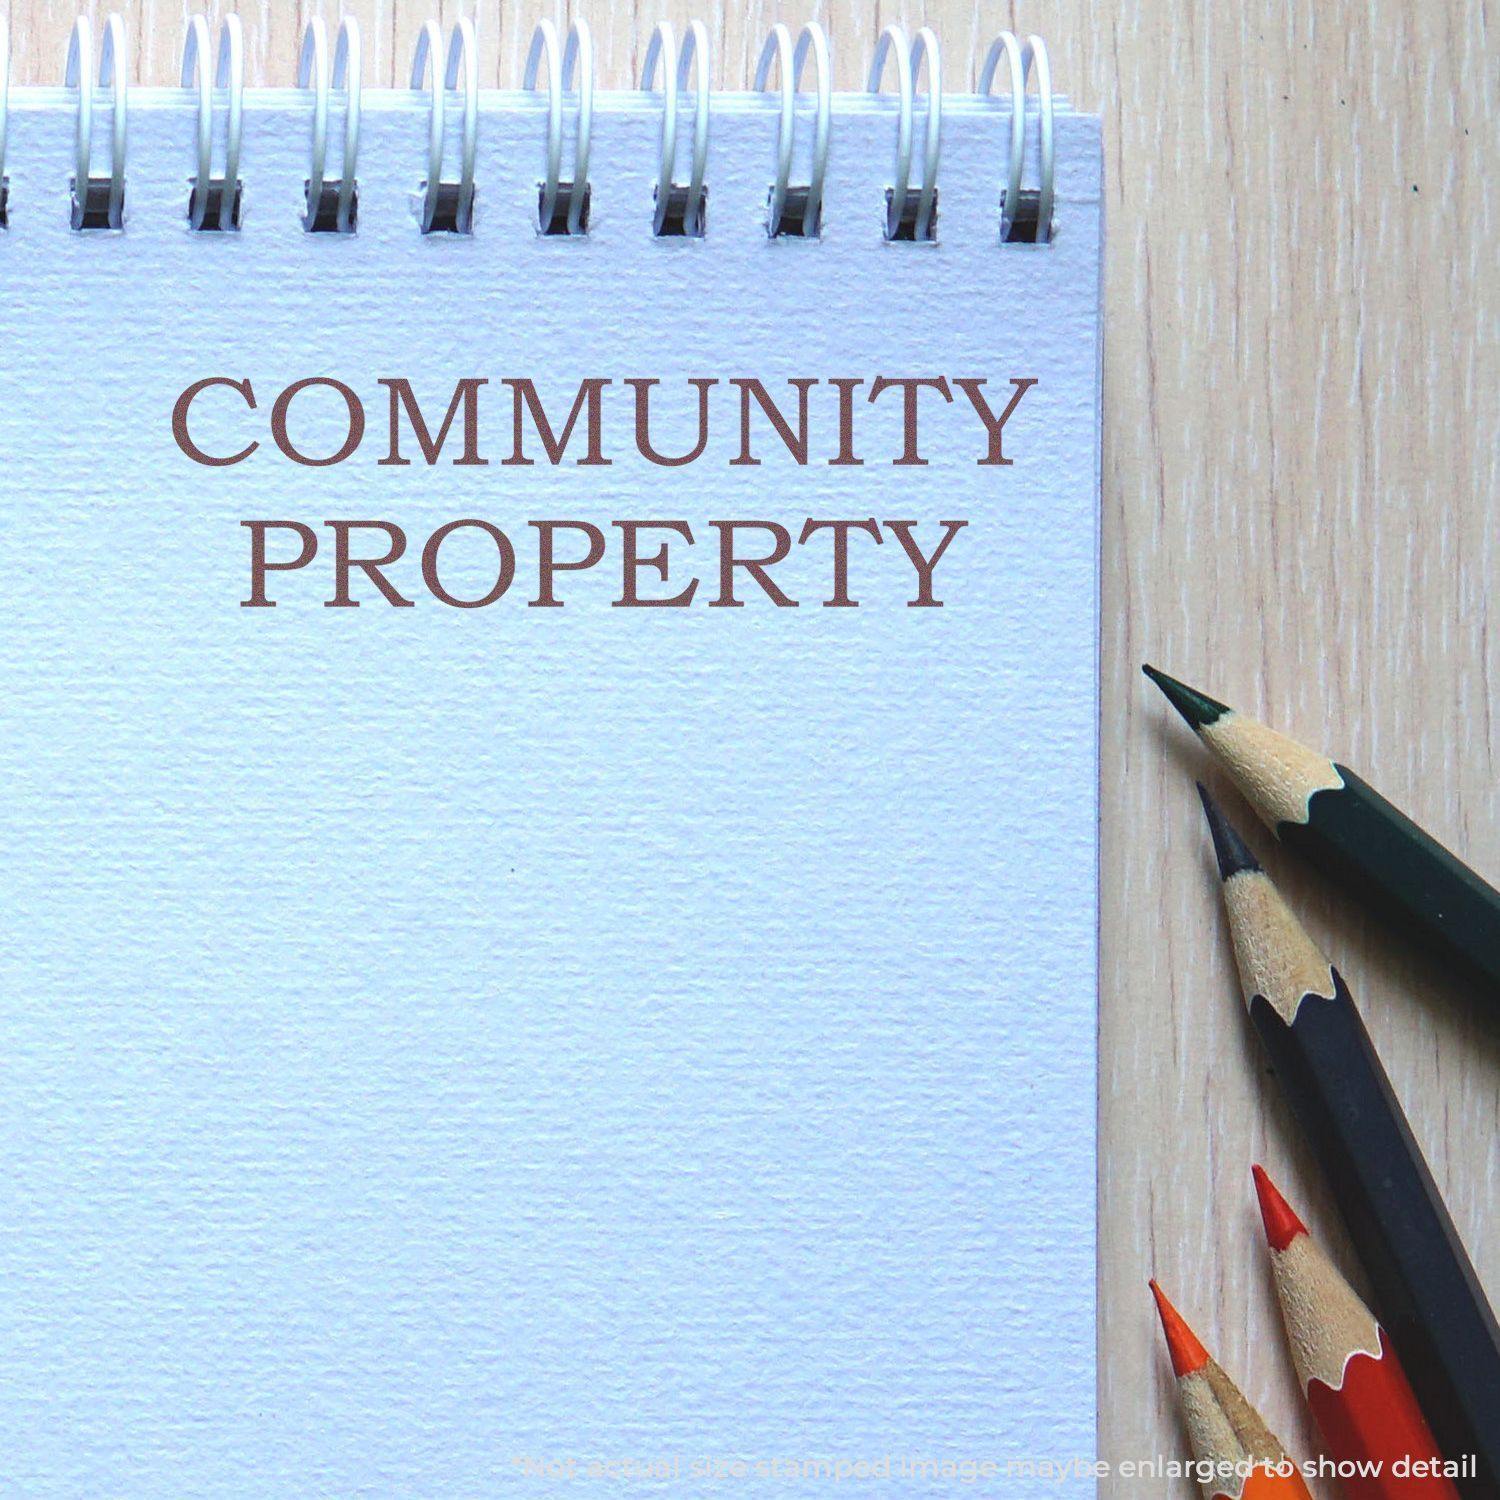 A self-inking stamp with a stamped image showing how the text "COMMUNITY PROPERTY" is displayed after stamping.